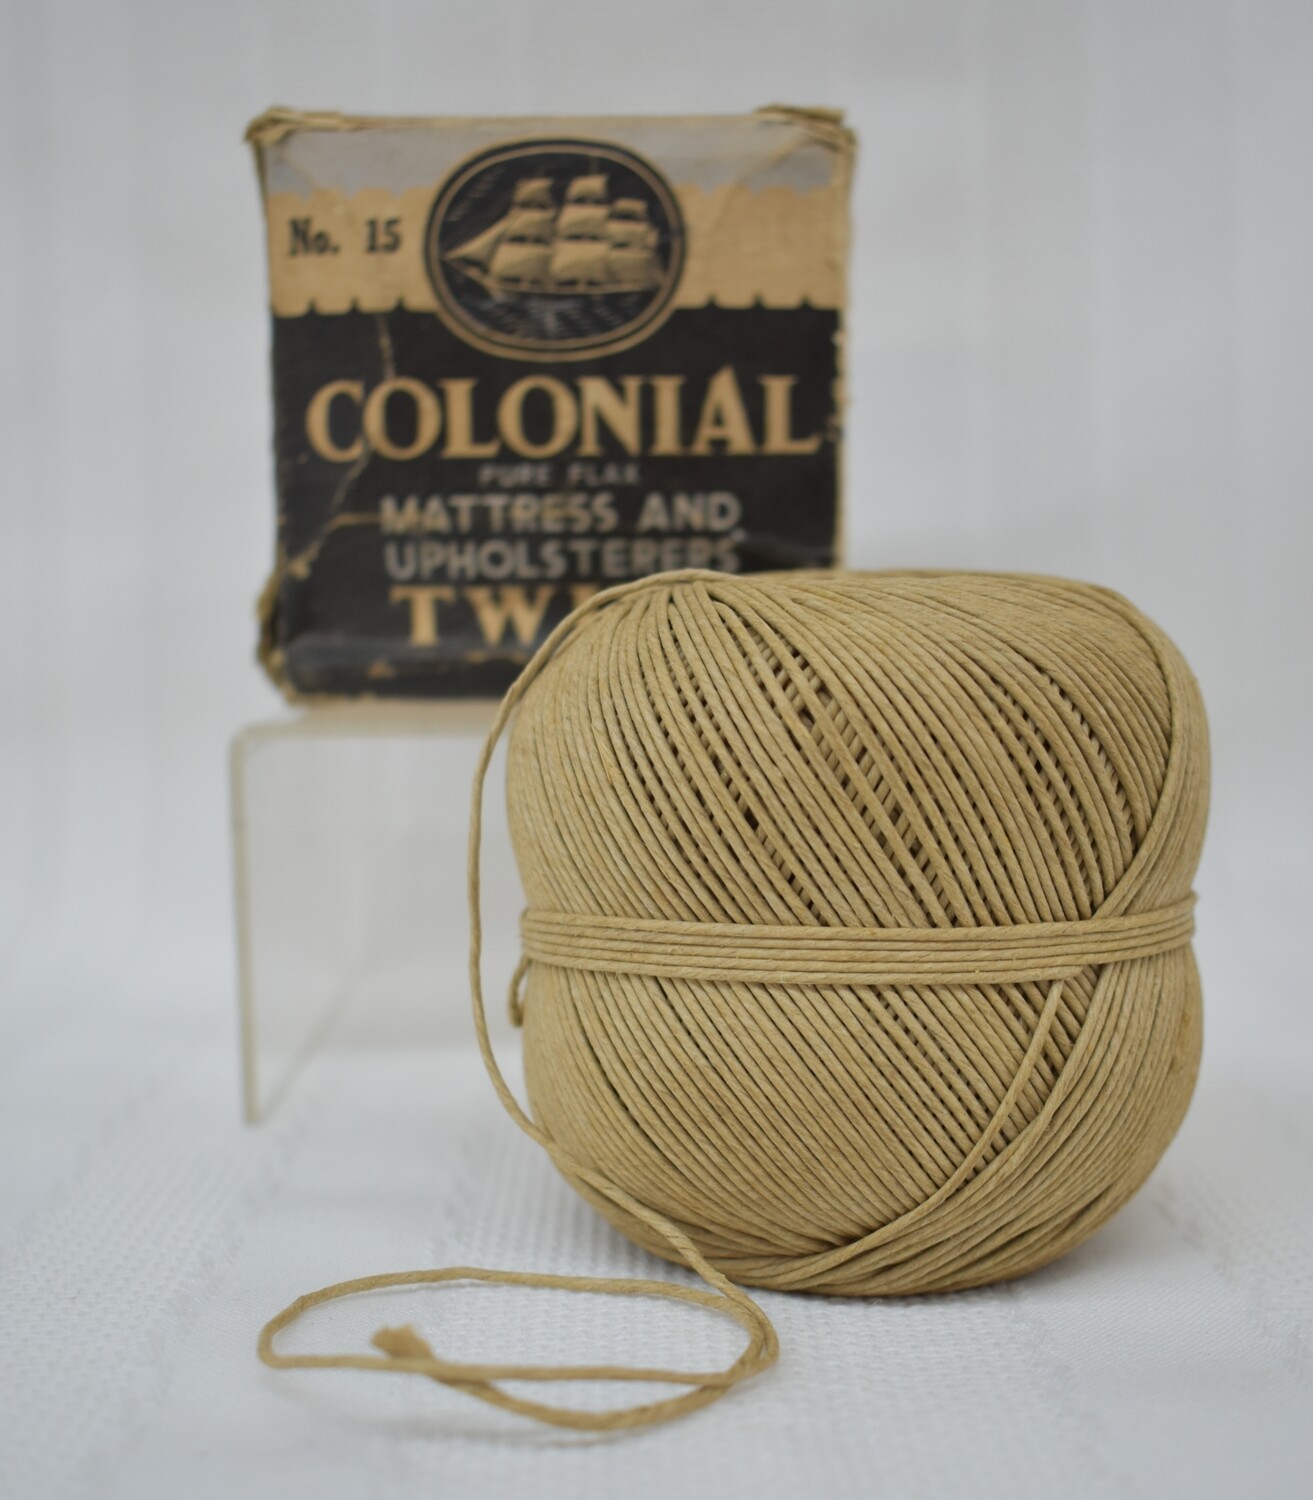 Vintage Colonial Pure Flax Upholstery Twine w/ Original Box